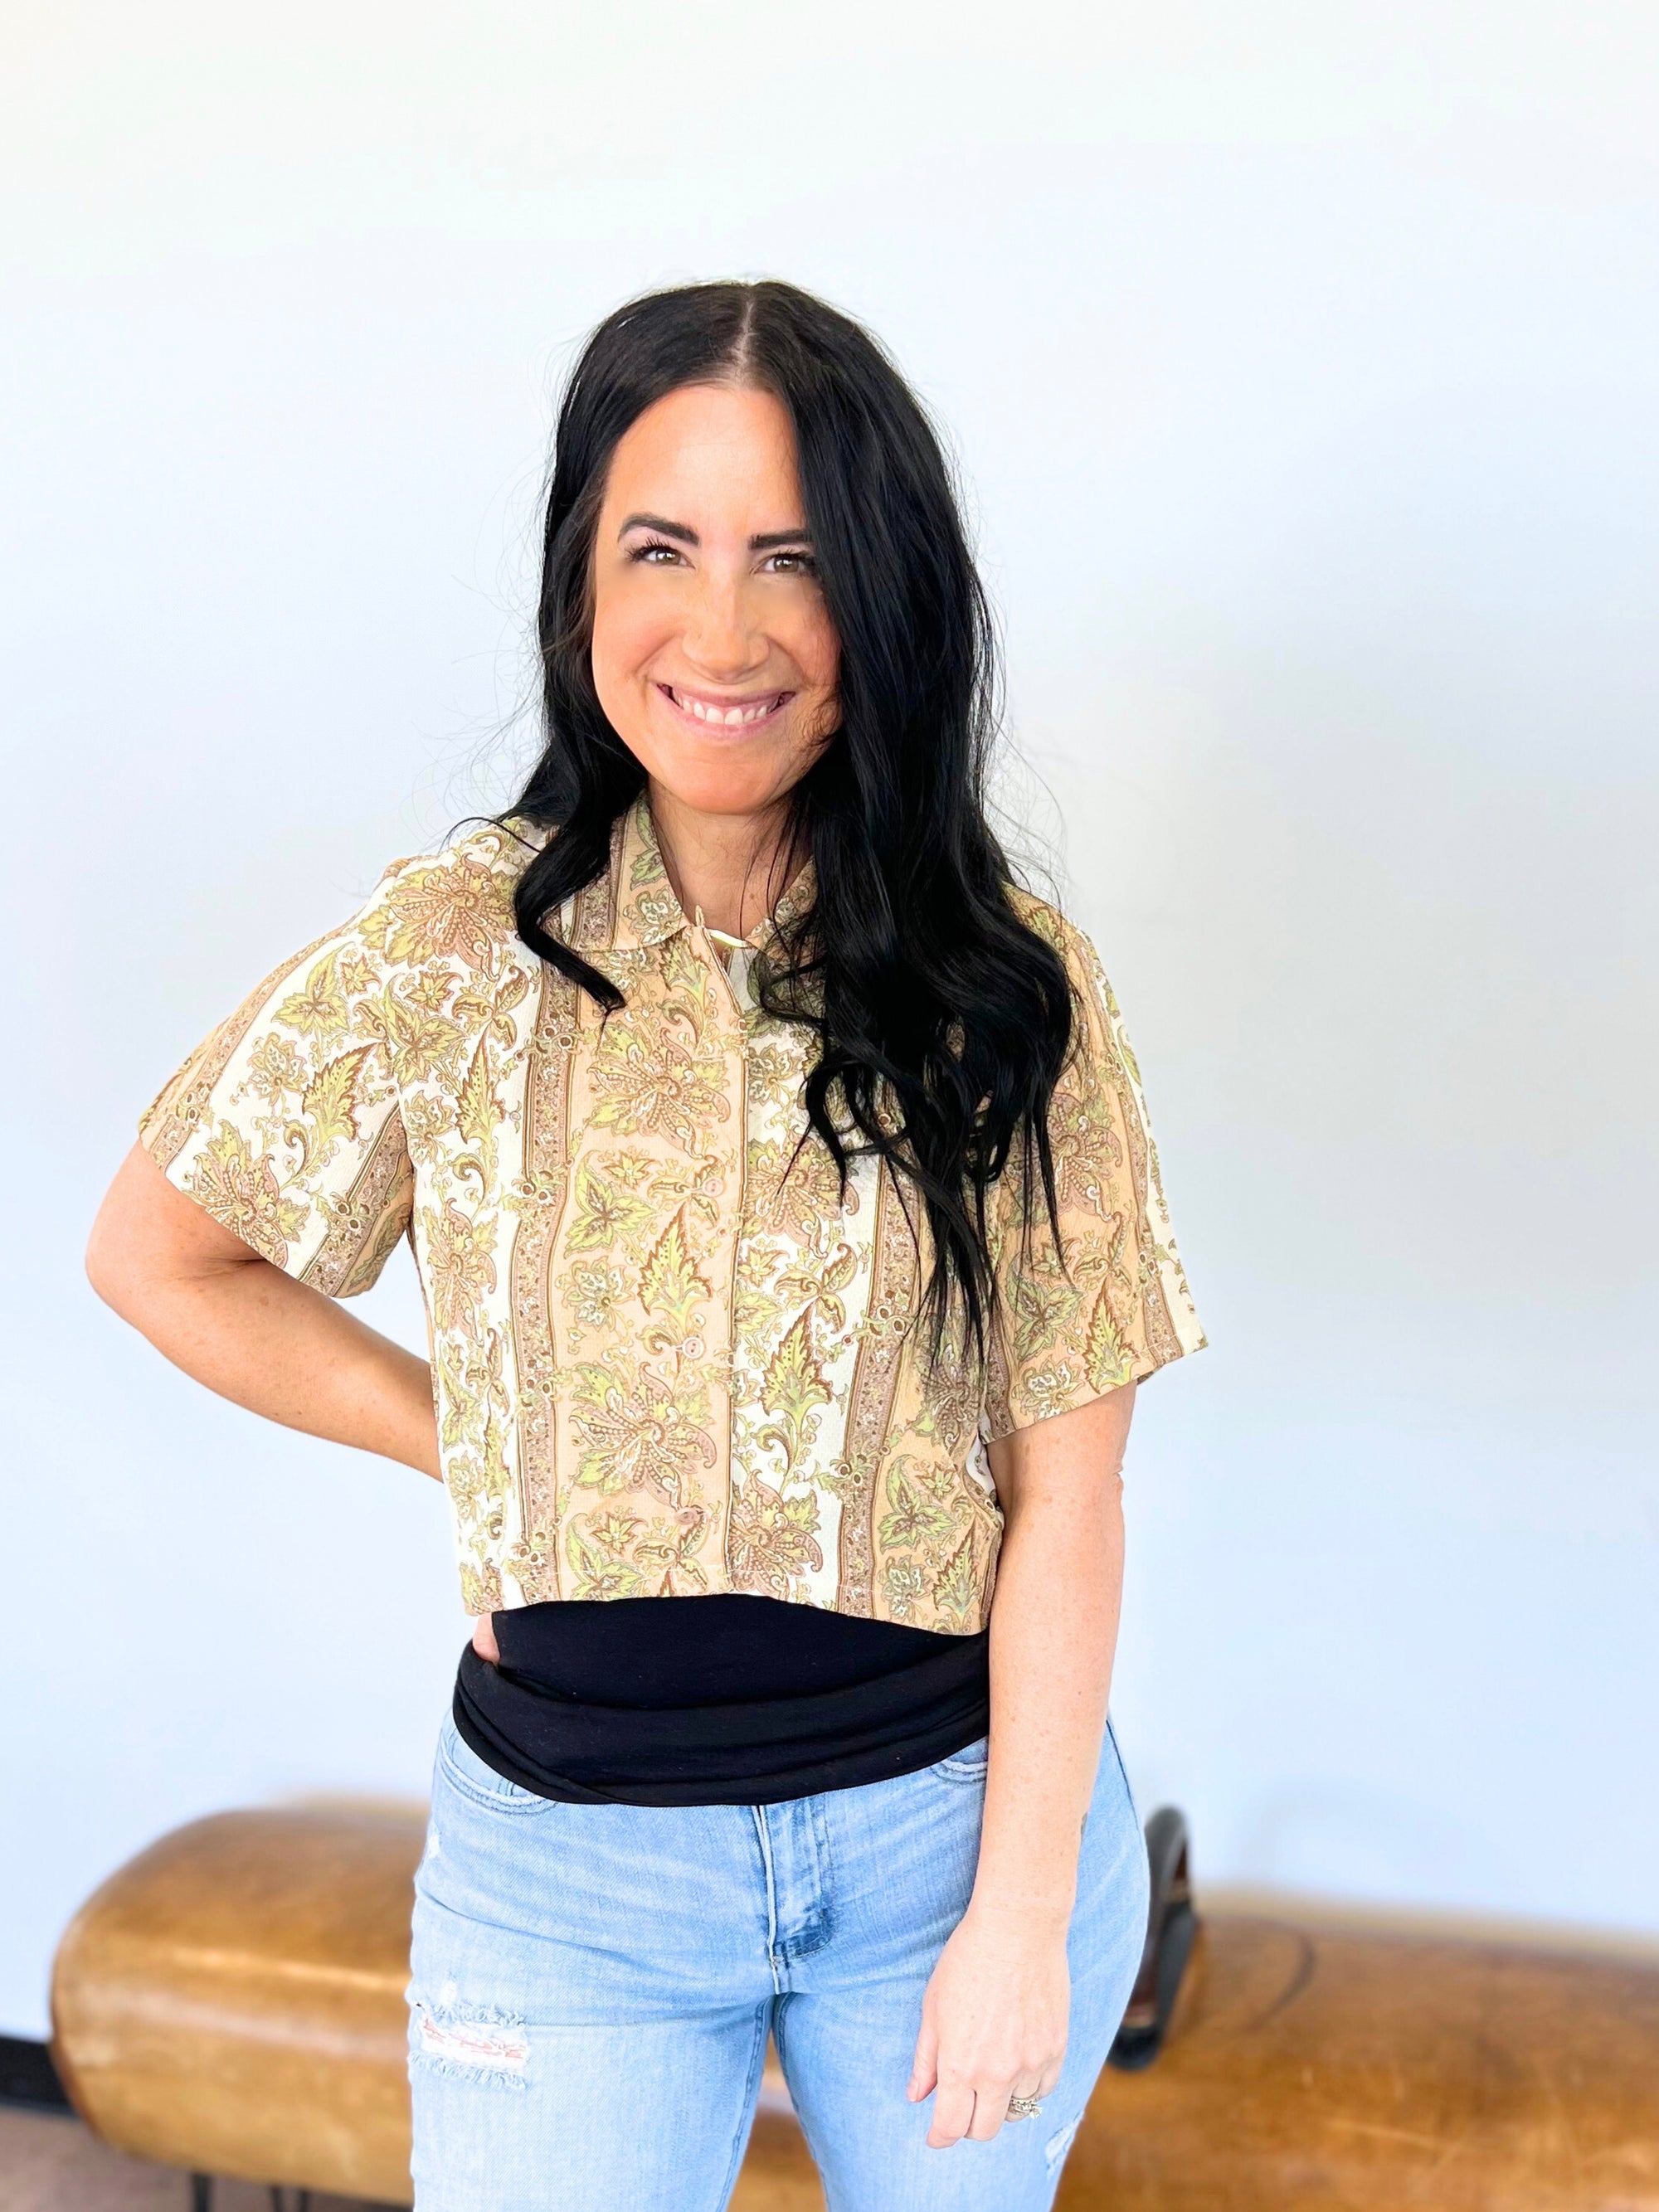 The Upcycled Button Up Blouse - Option 1 (S/M)